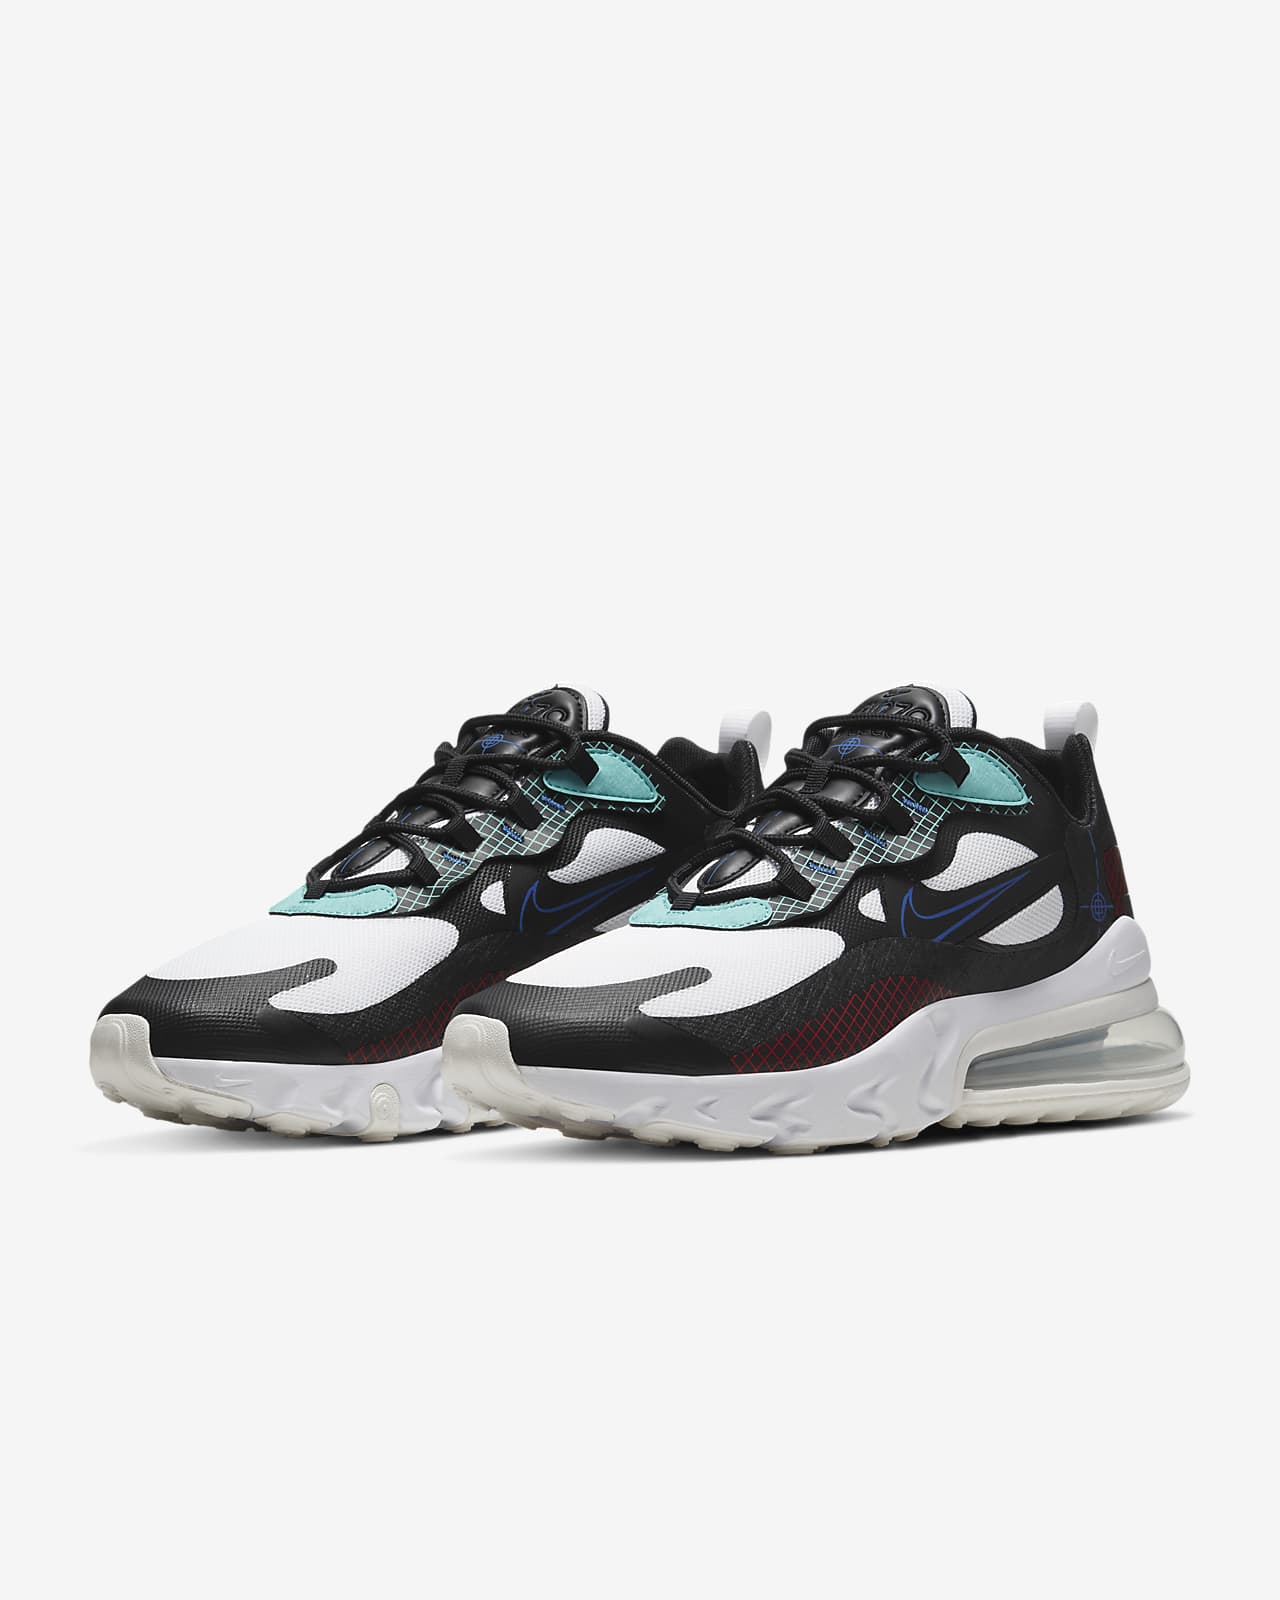 nike 270 reacts mens